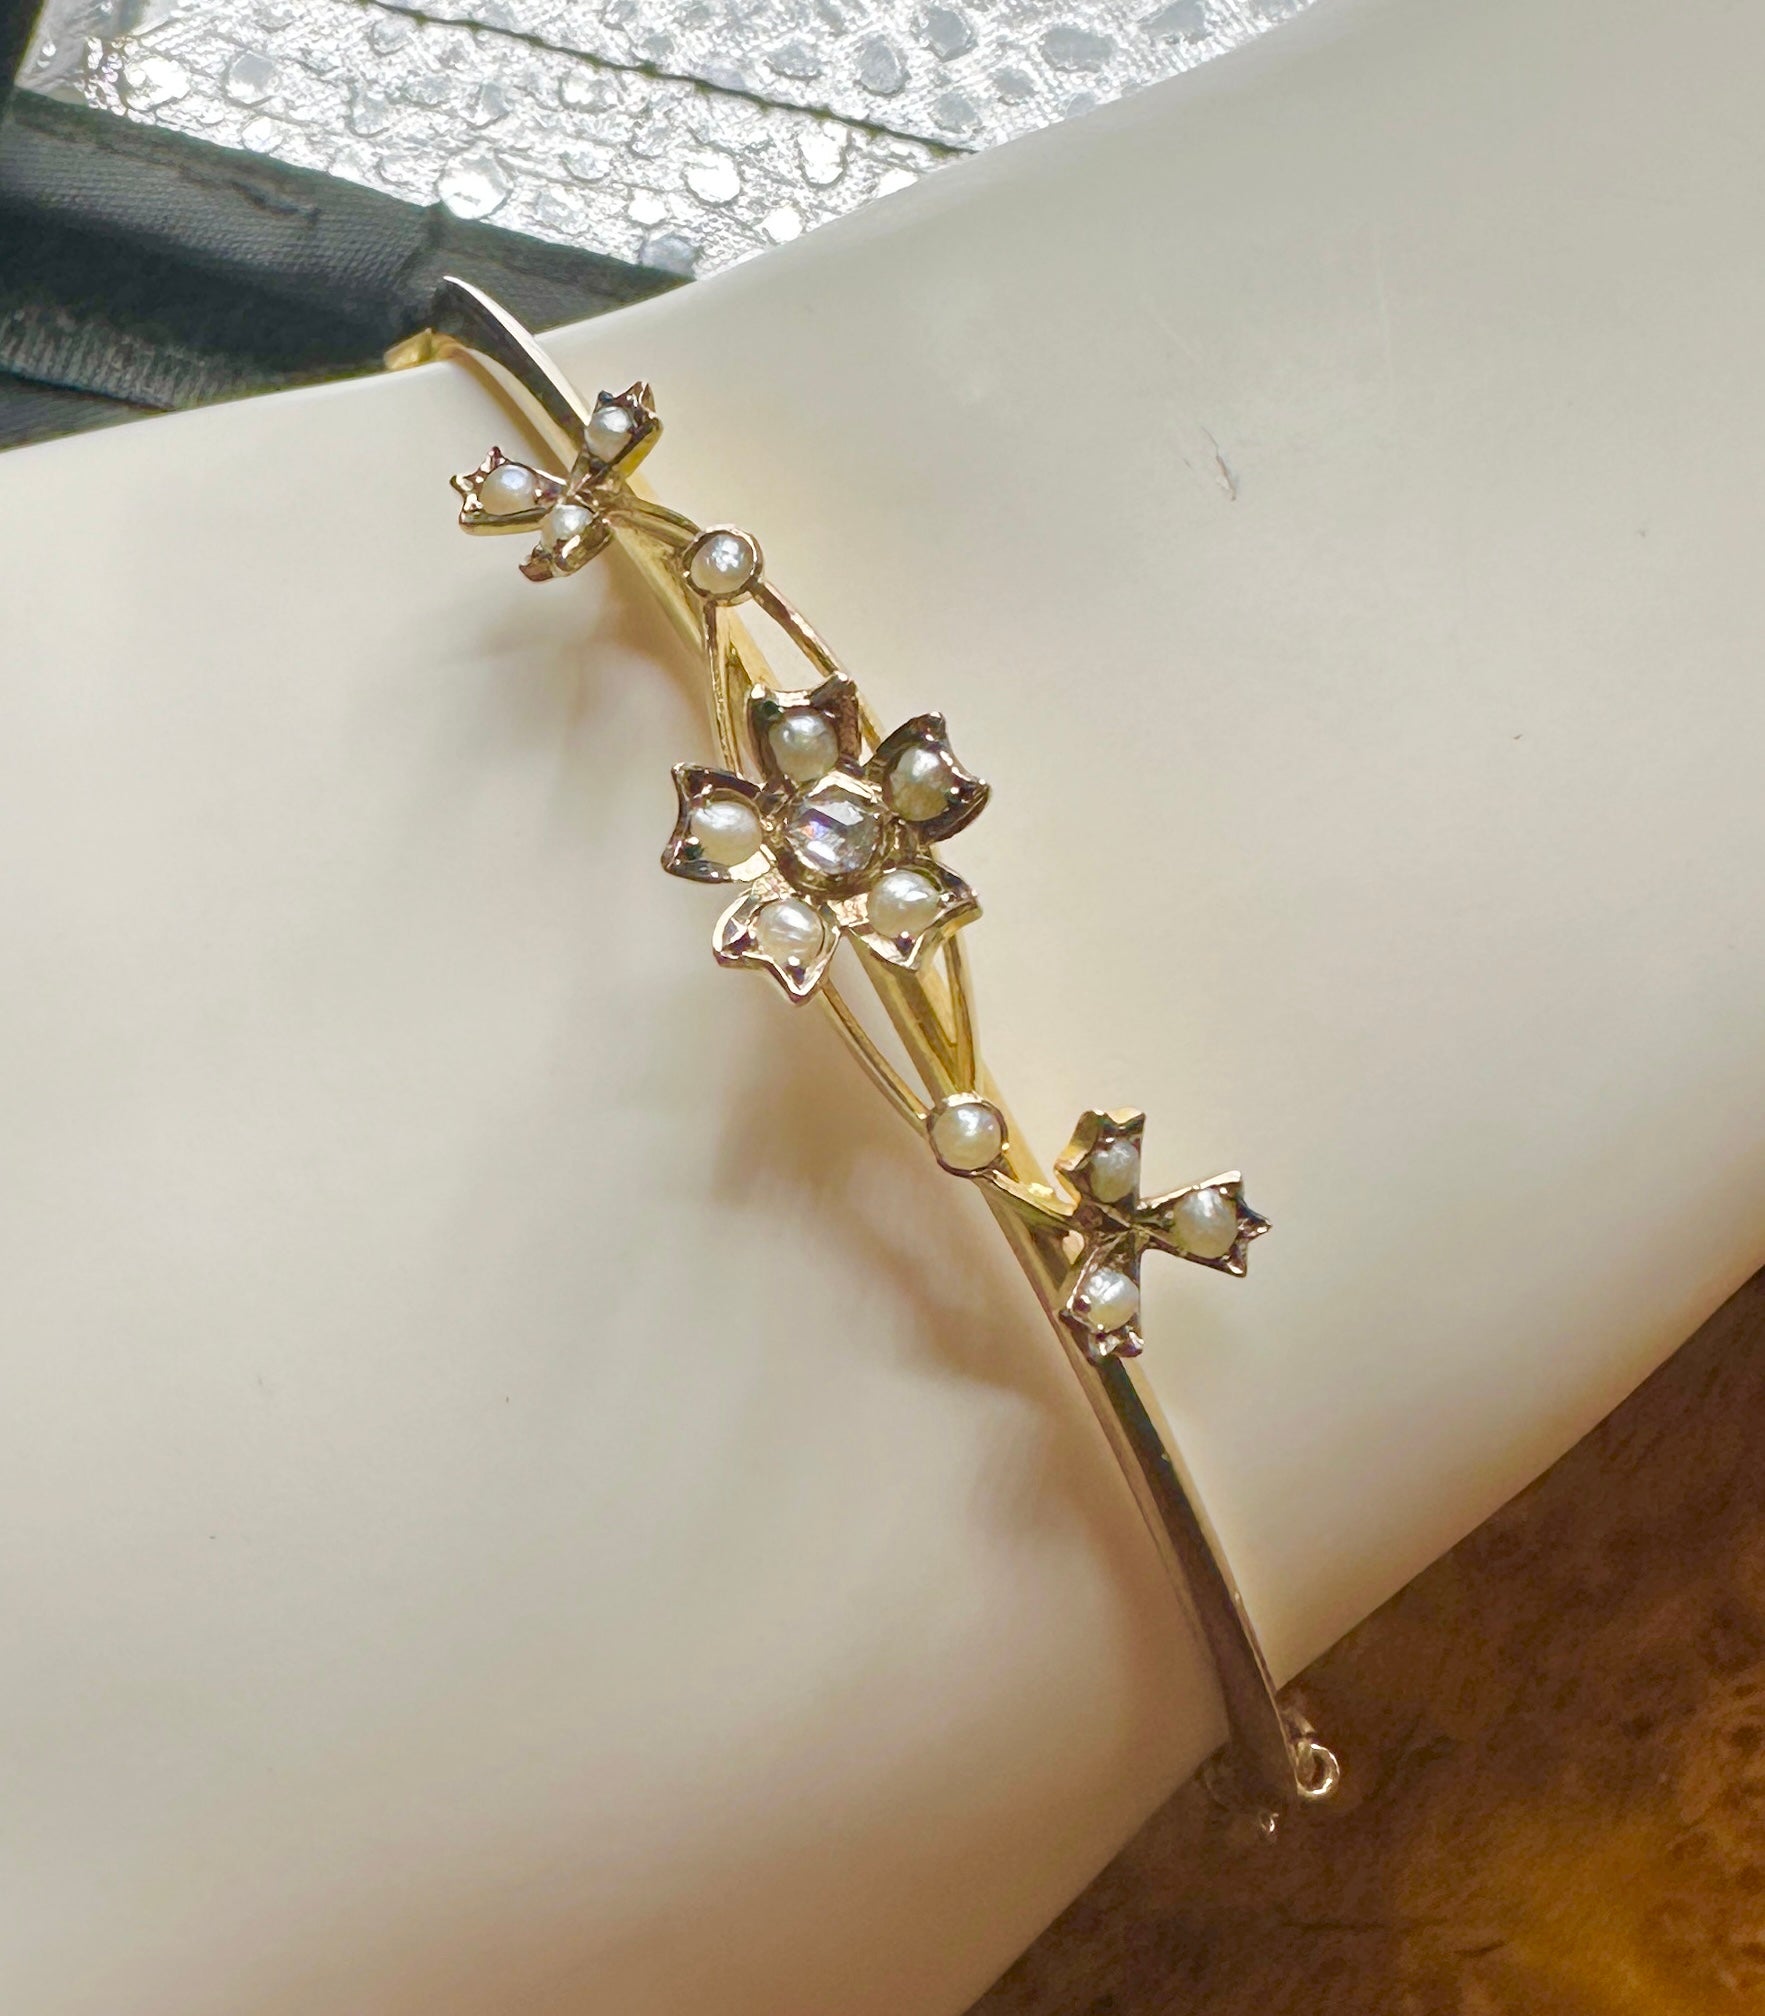 This is a delightful Victorian - Art Nouveau Bangle Bracelet with a Flower motif set with a central Rose Cut Diamond and Pearls in 10 Karat Gold.  The elegant flowers have a wonderful fully modeled three dimensional design.  The central flower has a